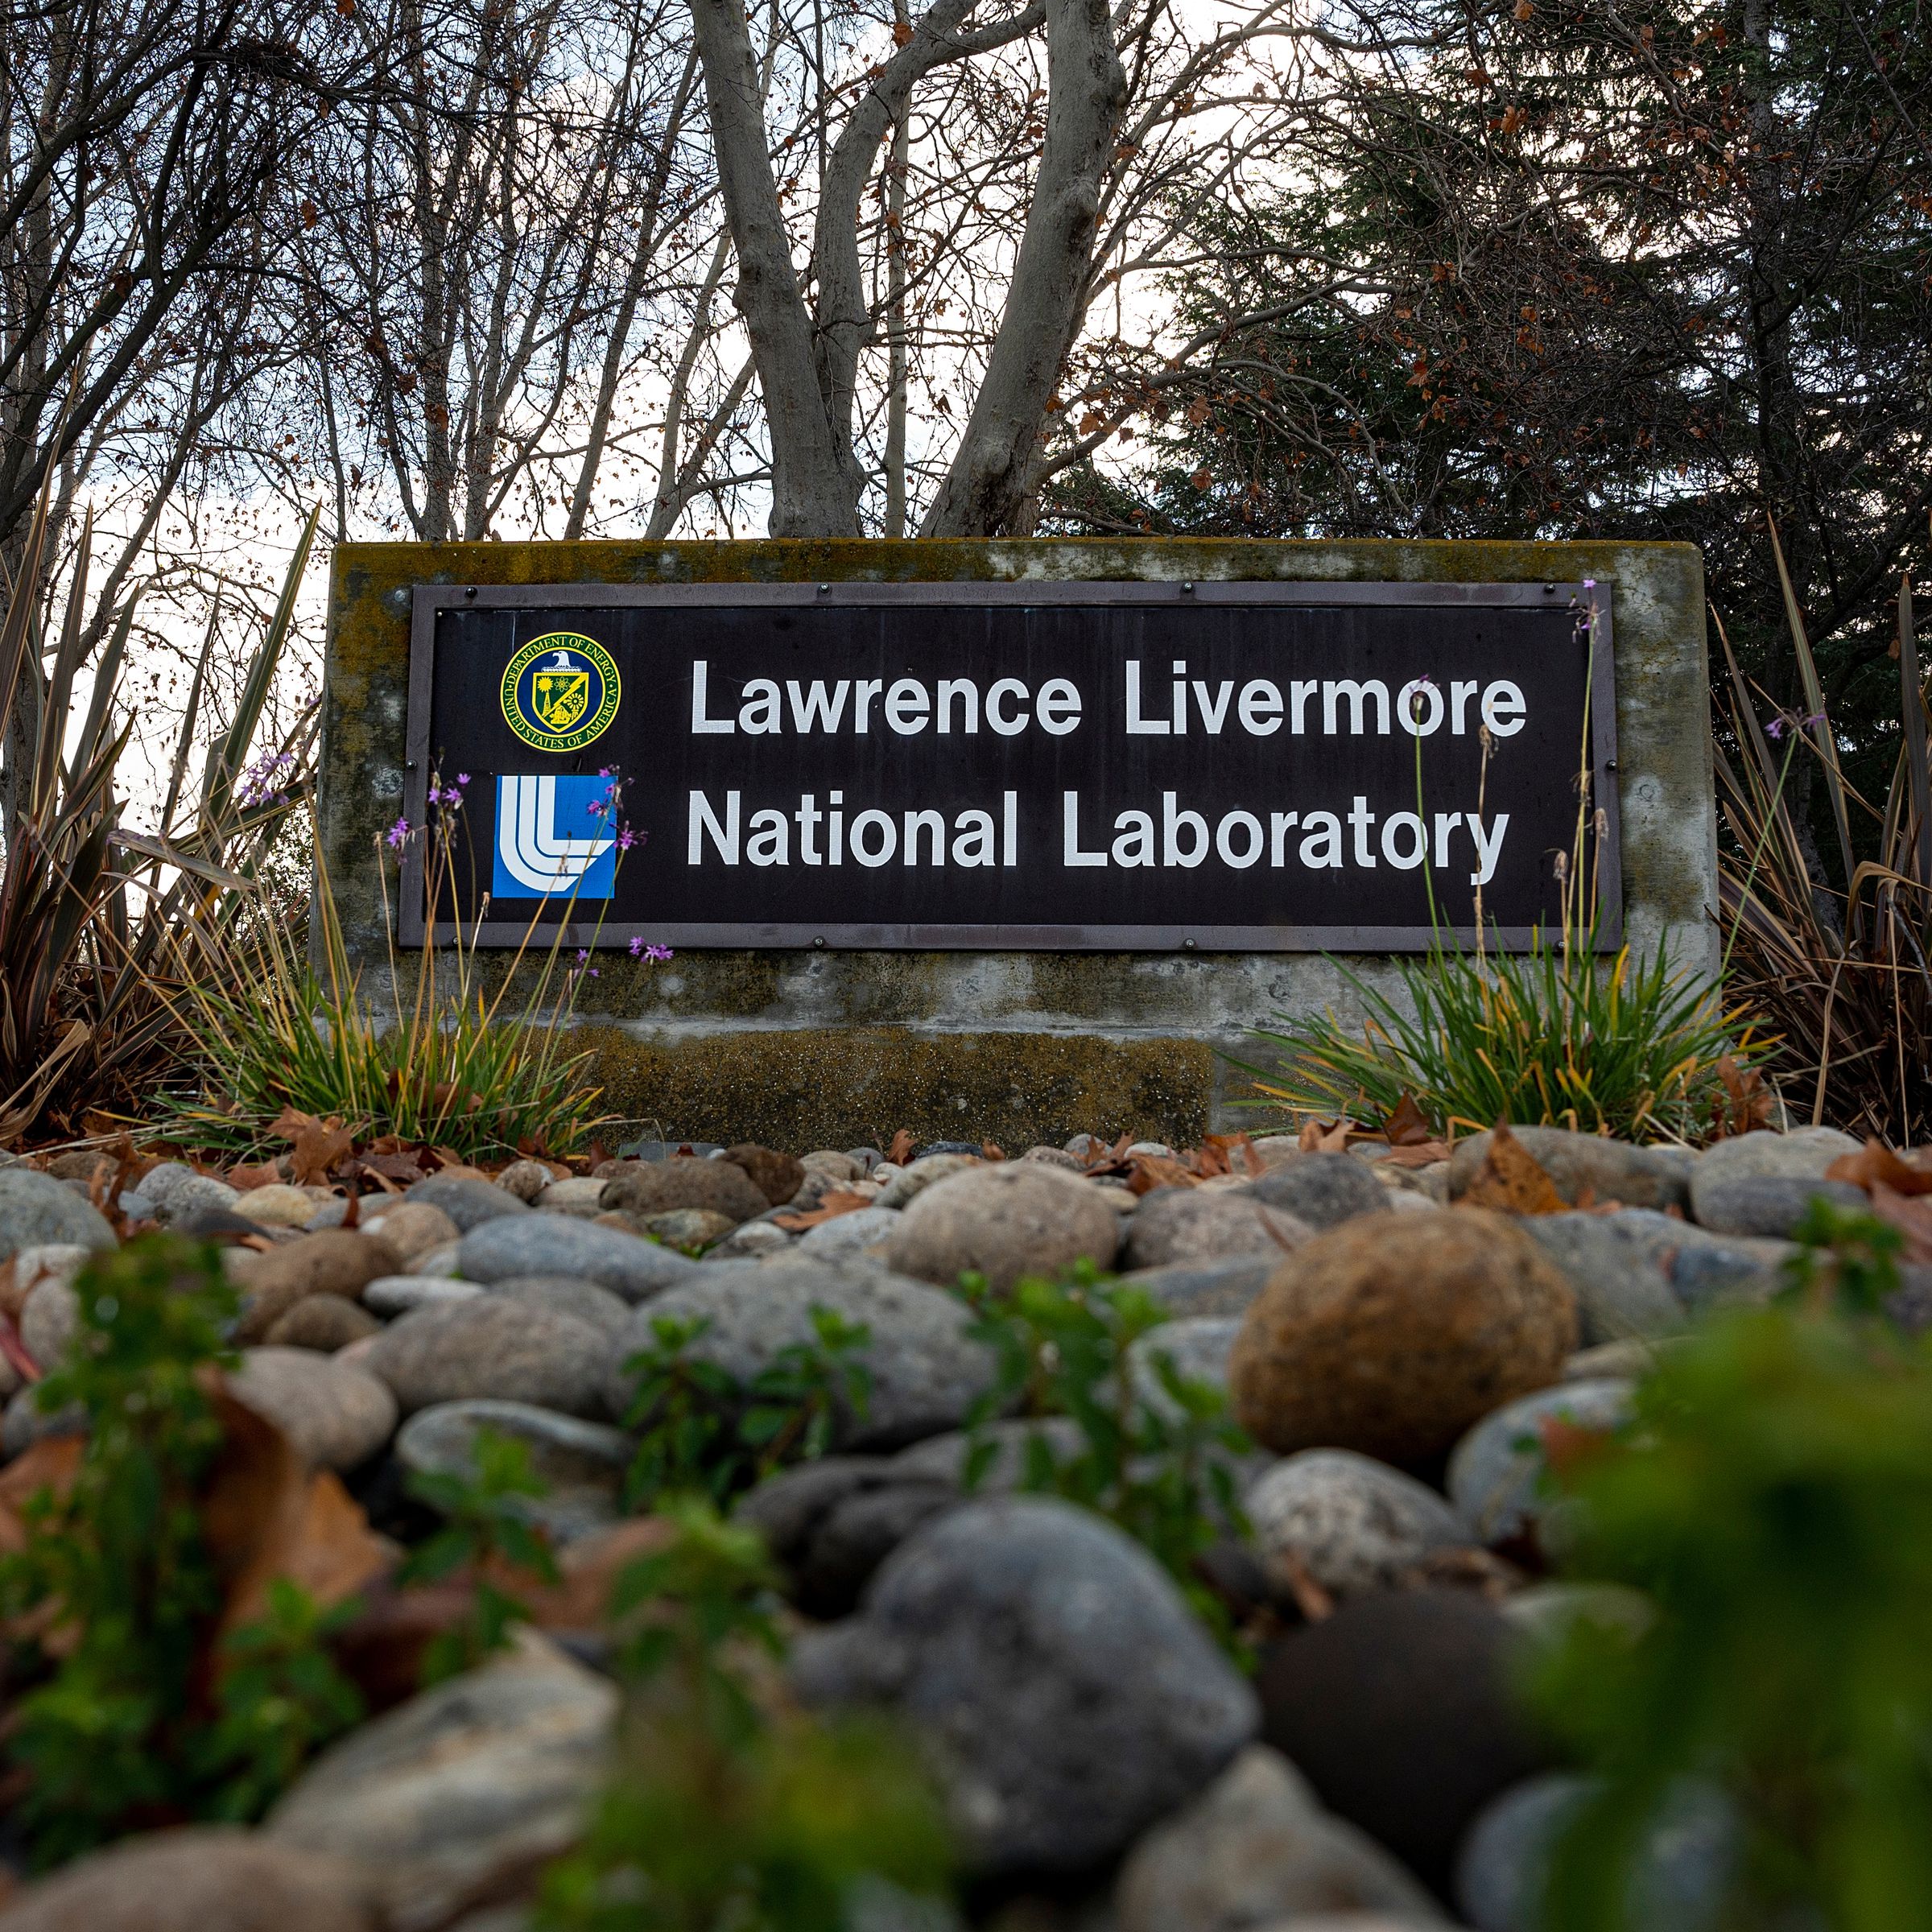 A sign at a gate entrance to the Lawrence Livermore National Laboratory